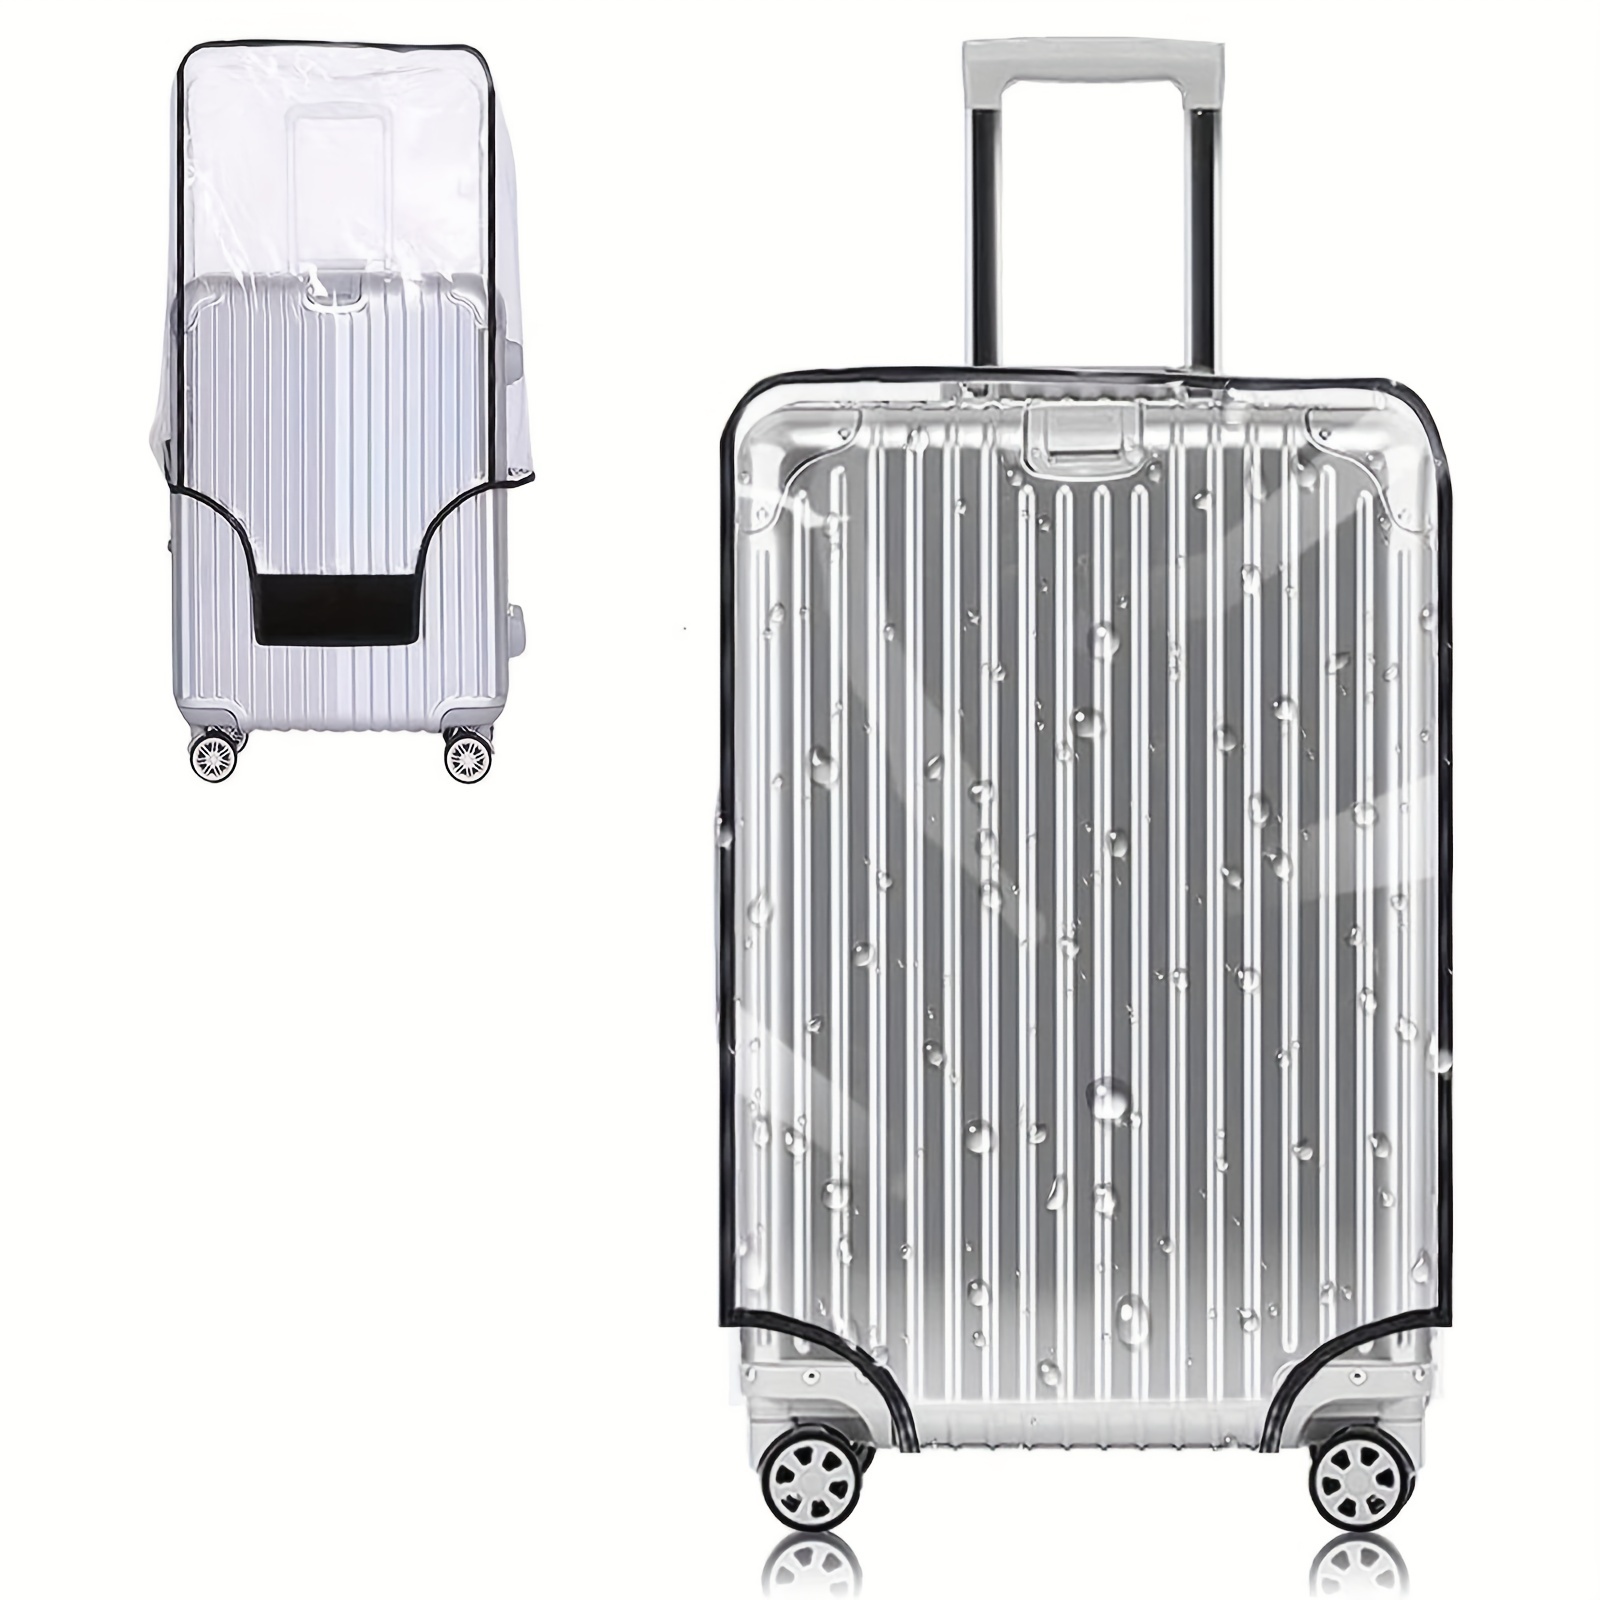 Luggage online-shop www., Accessories, LUGGAGE COVERS